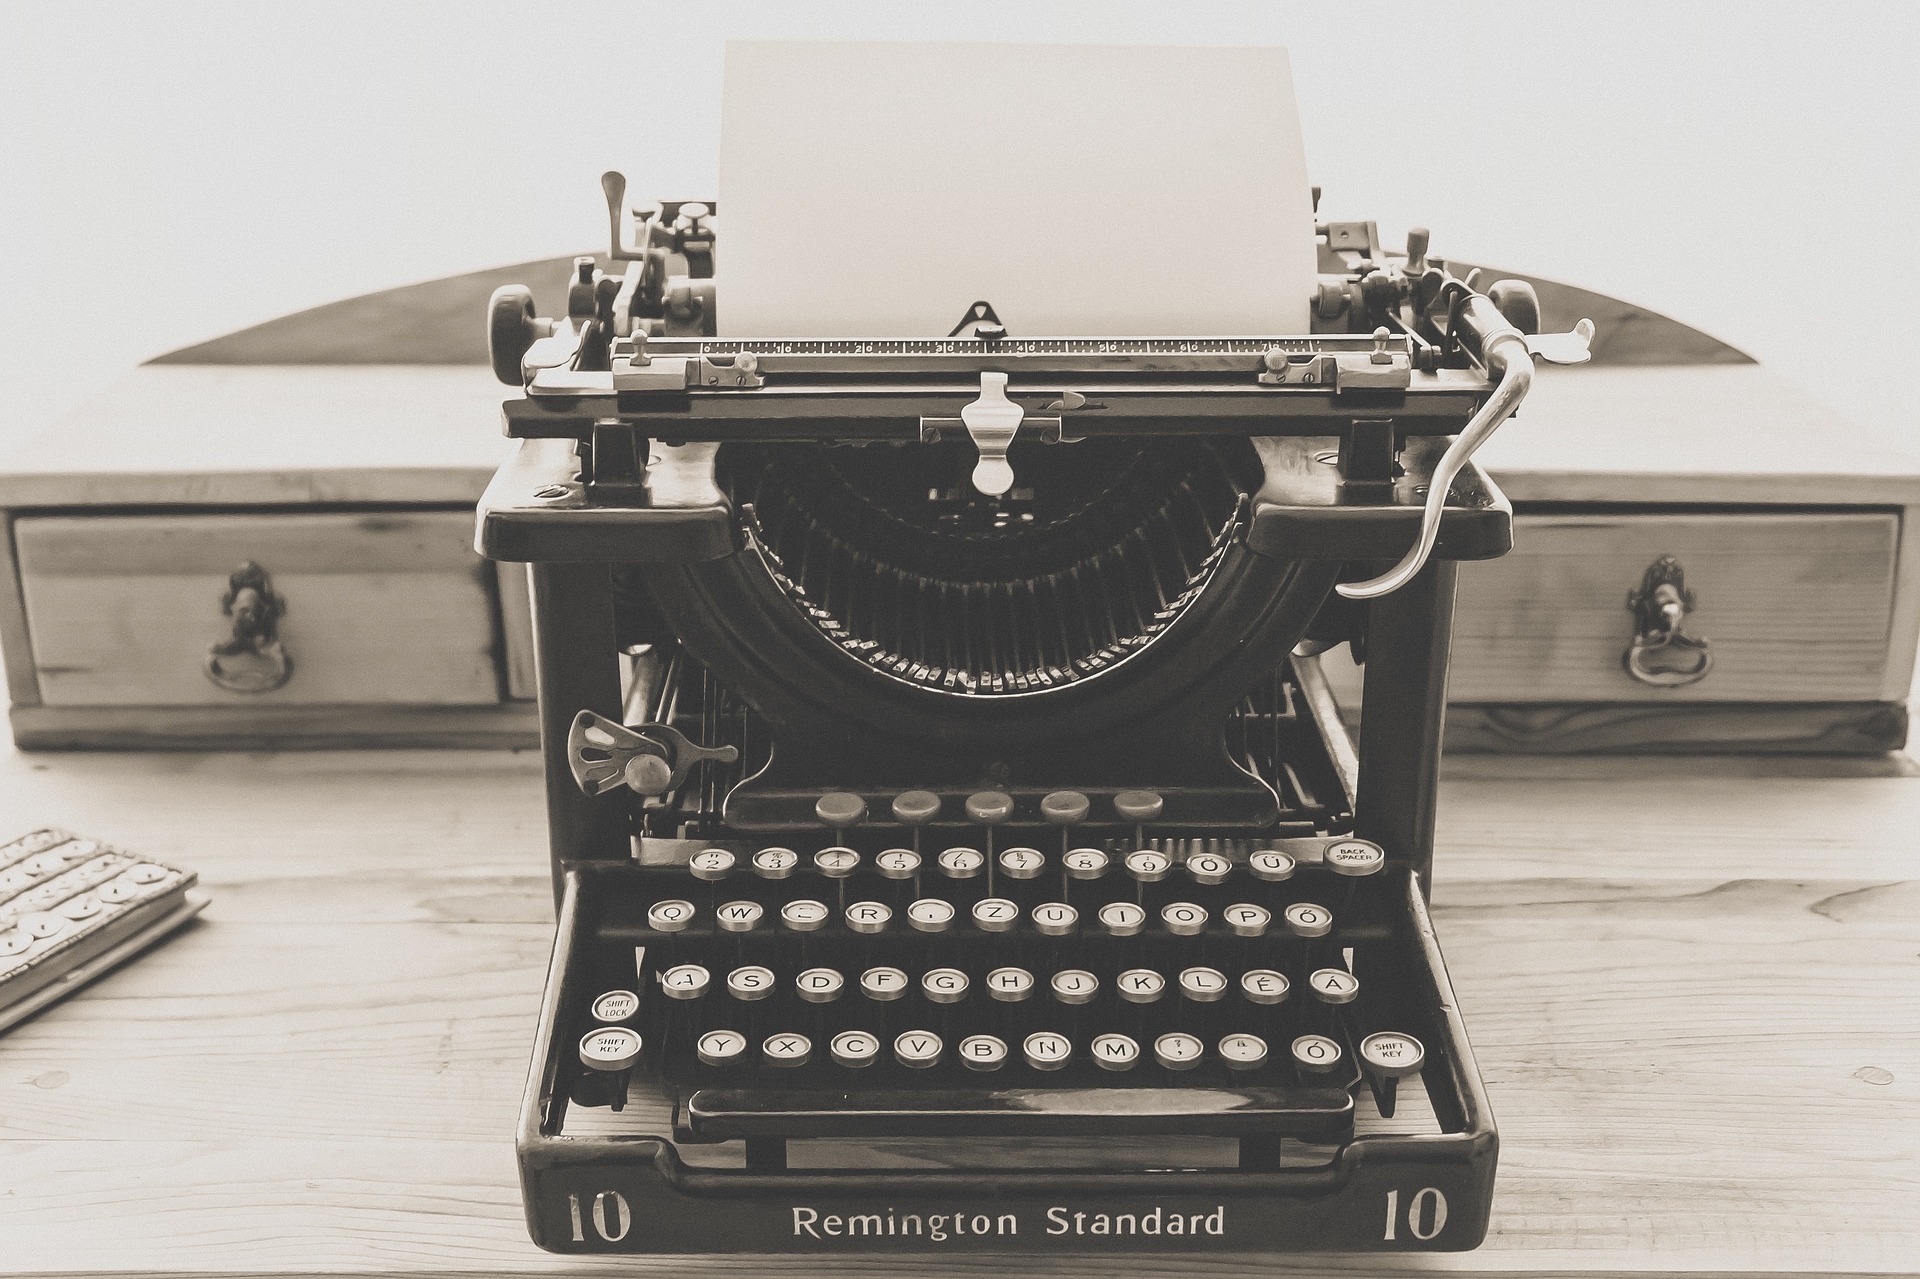 guest posting: a typewriter sits on a desk waiting to be used to submit a great guest post to Writing Life!